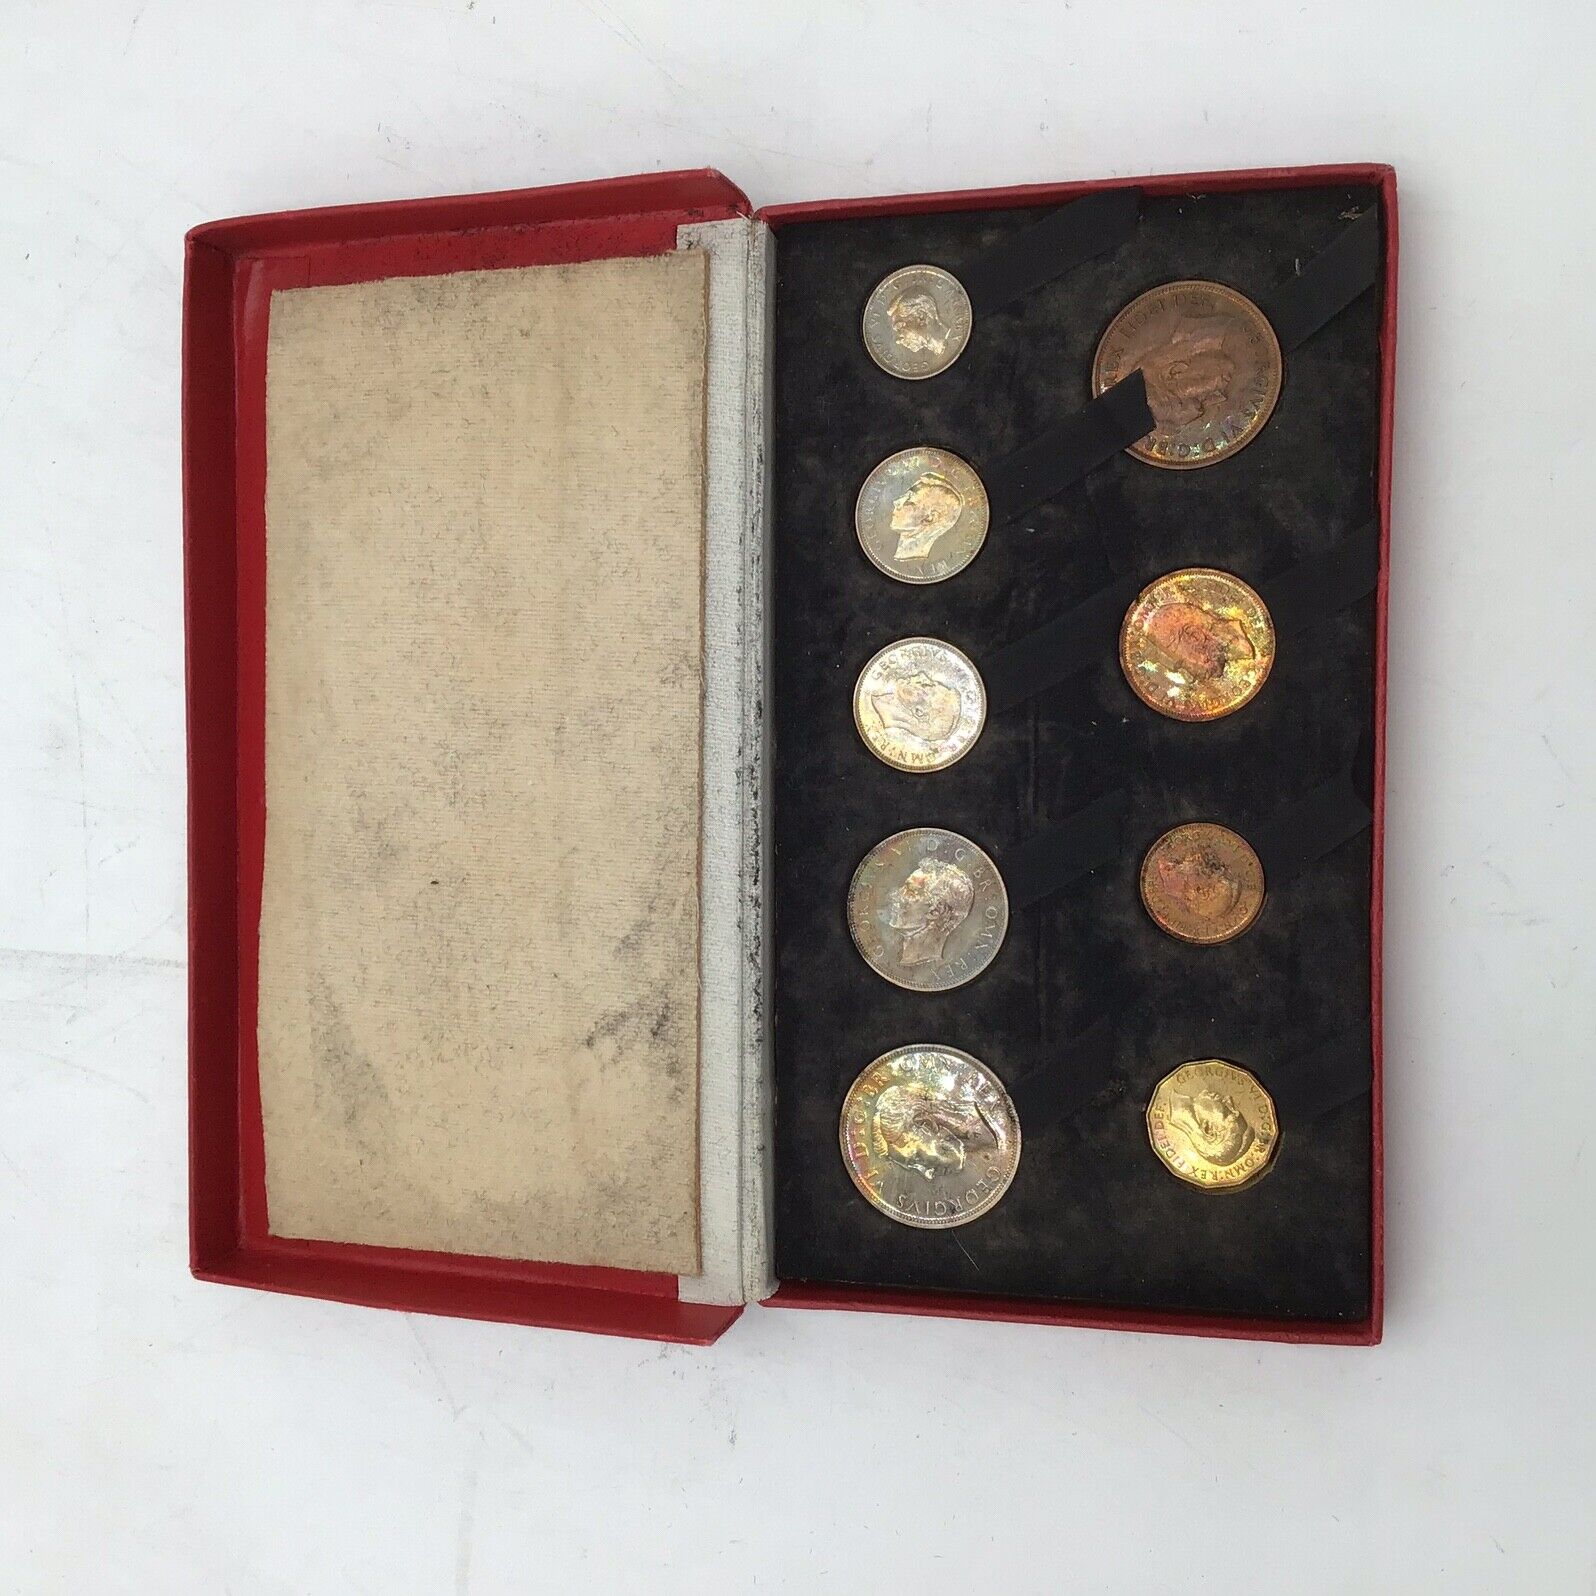 King George 1950 Royal Mint Set Of 9 Total Coins In Original Box